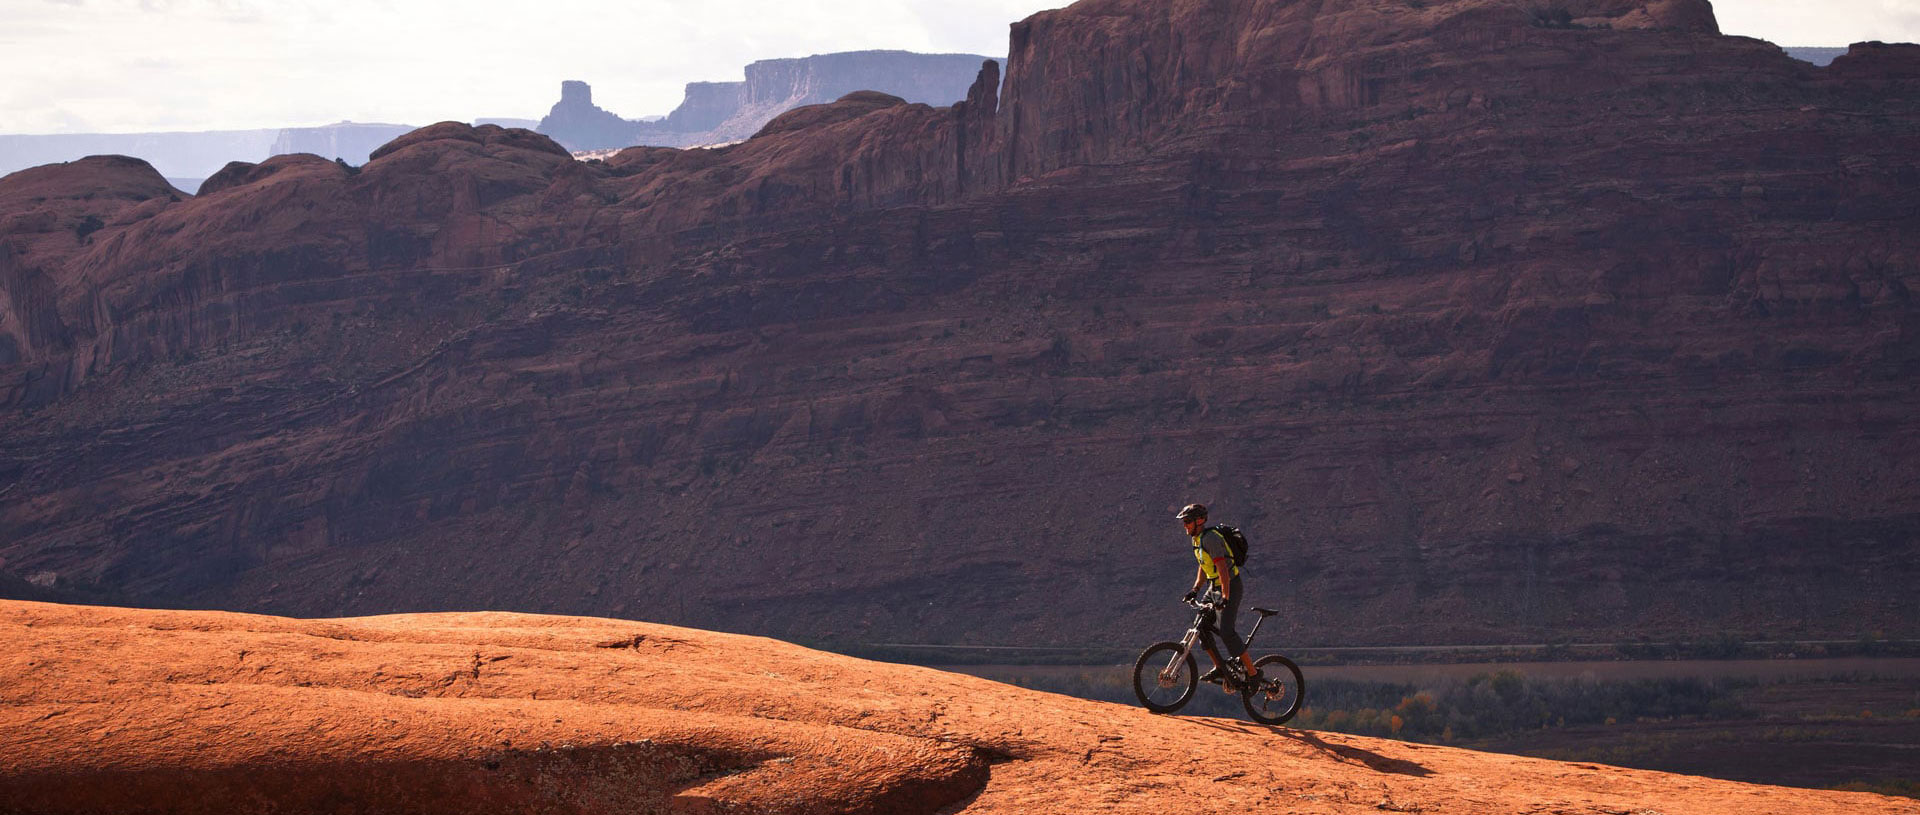 A large panoramic view of the monolithic mountains and sandcliffs of Moab, Utah and a lone male mountain biker riding up a trail.